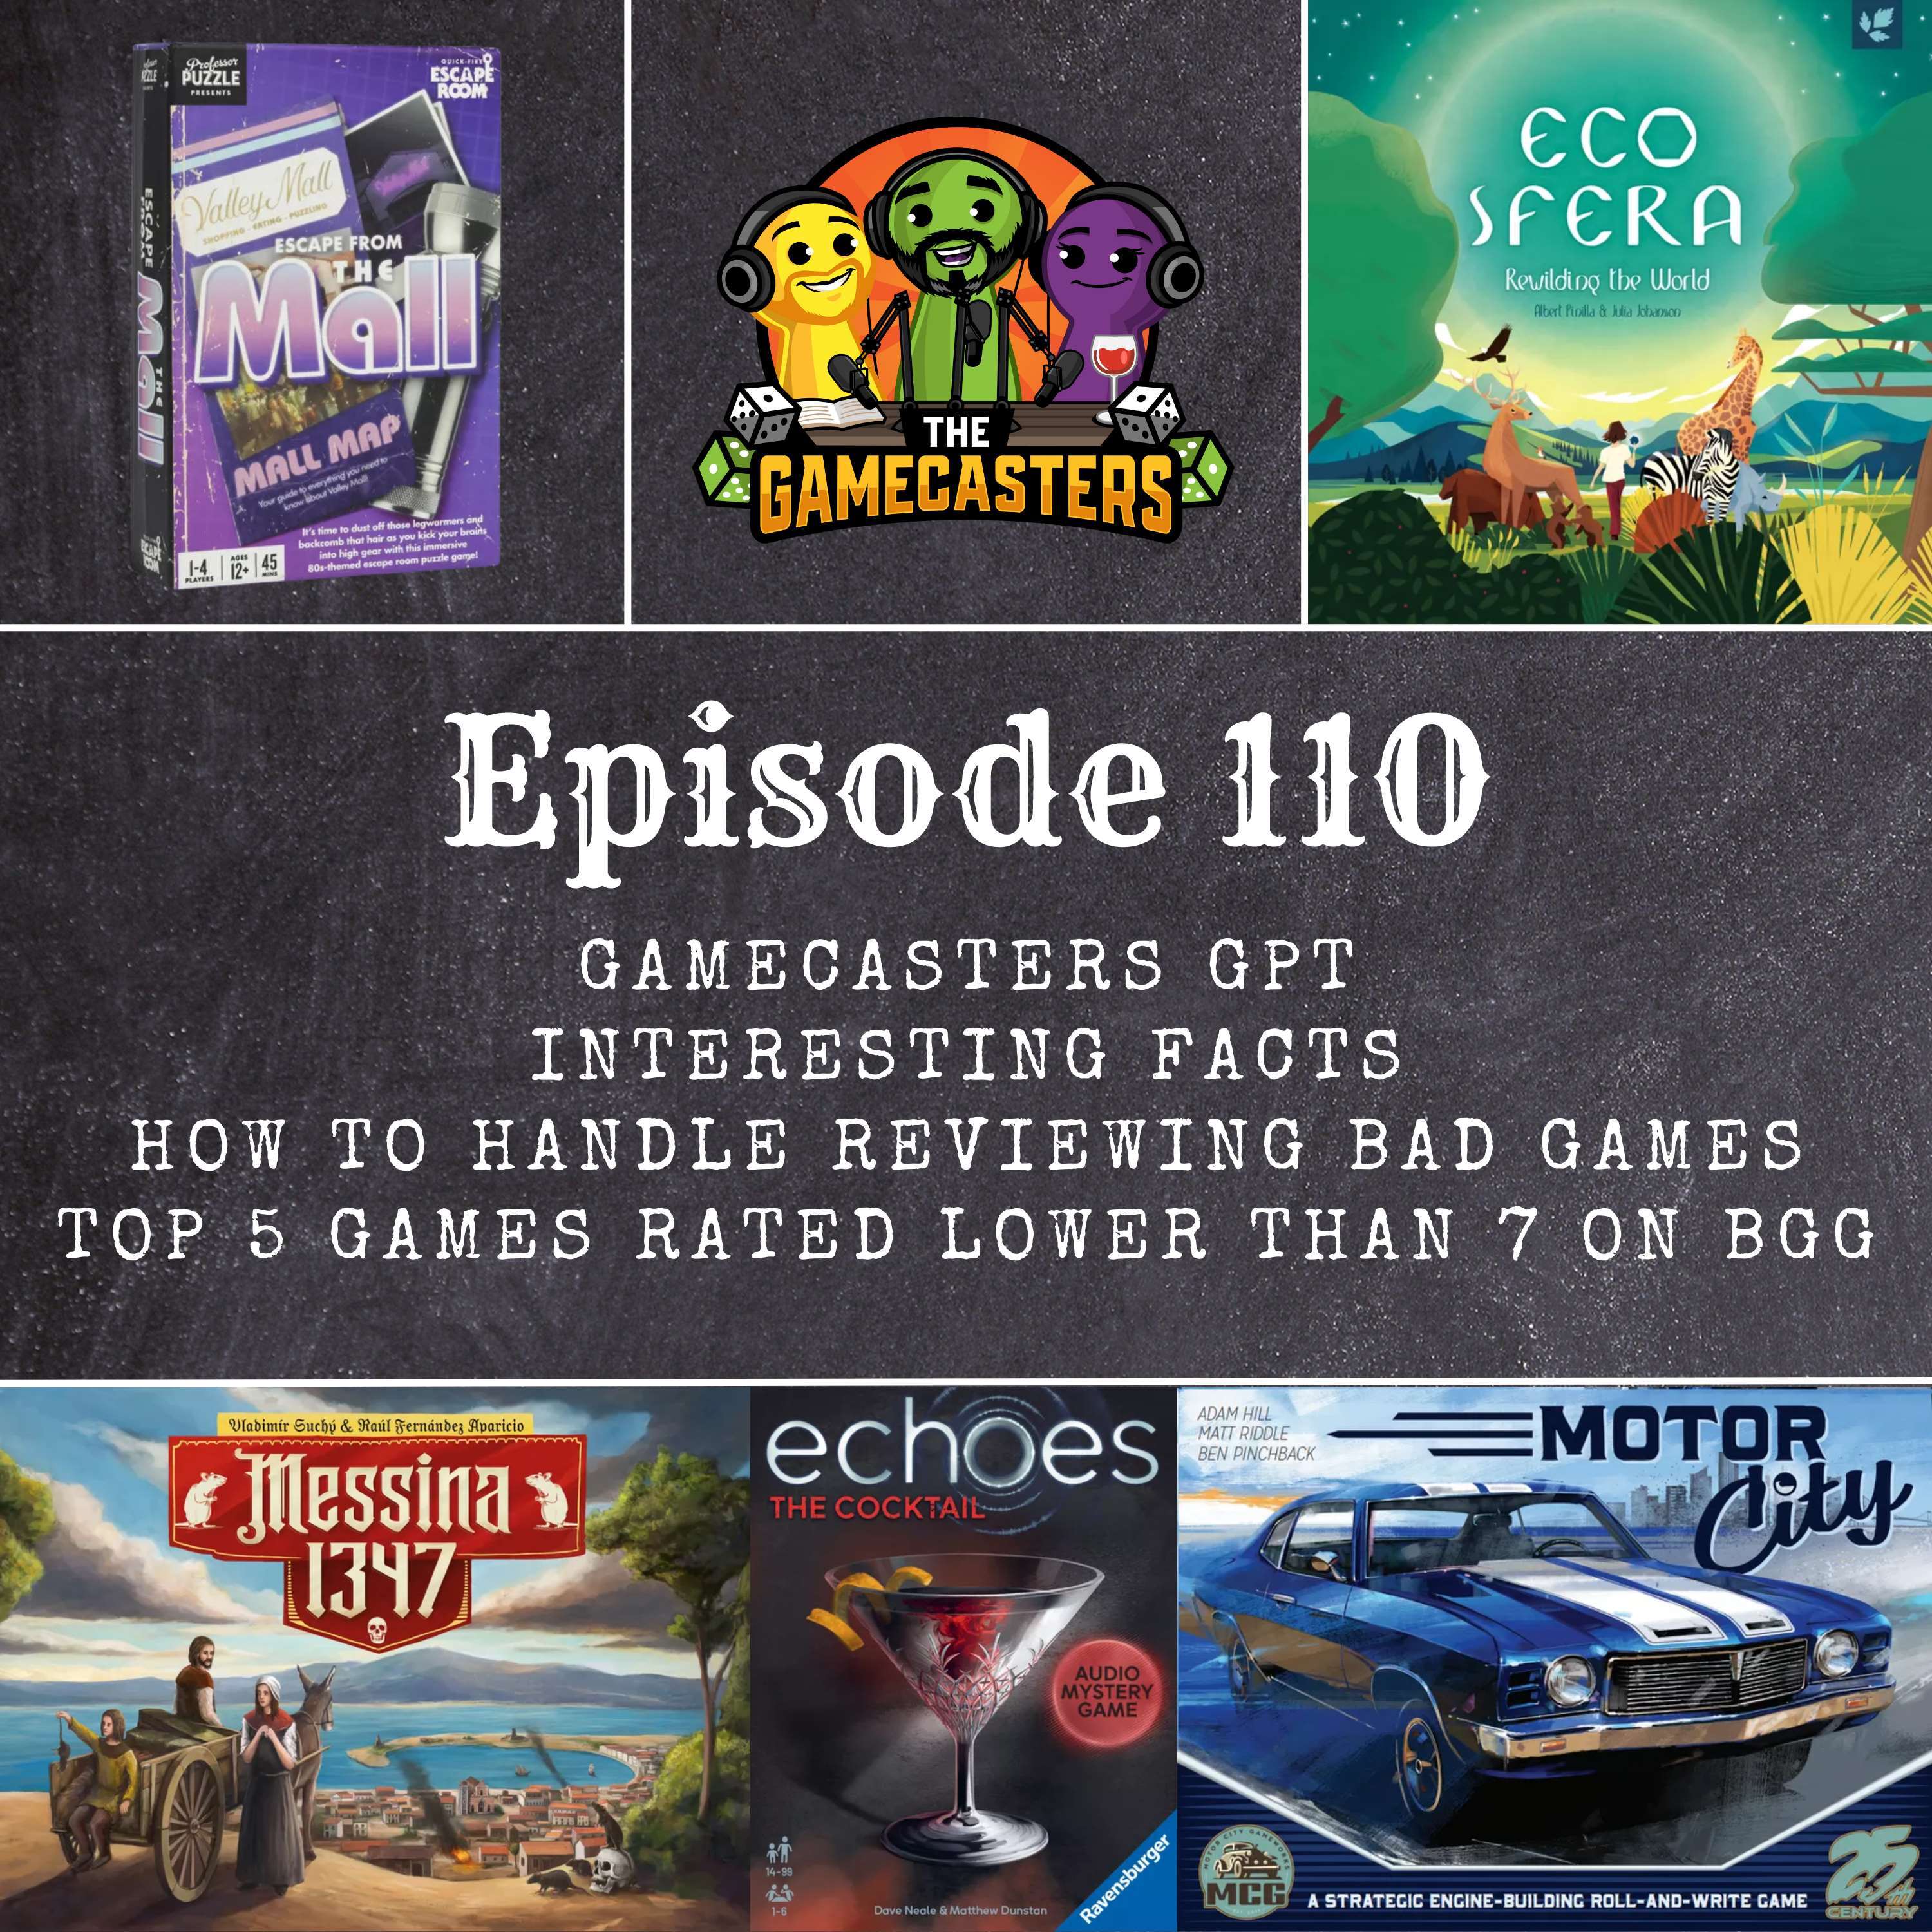 Episode 110: Messina 1347, Motor City, Echoes, Escape From The Mall, Ecosfera - Top 5 Games Under BGG 7.0